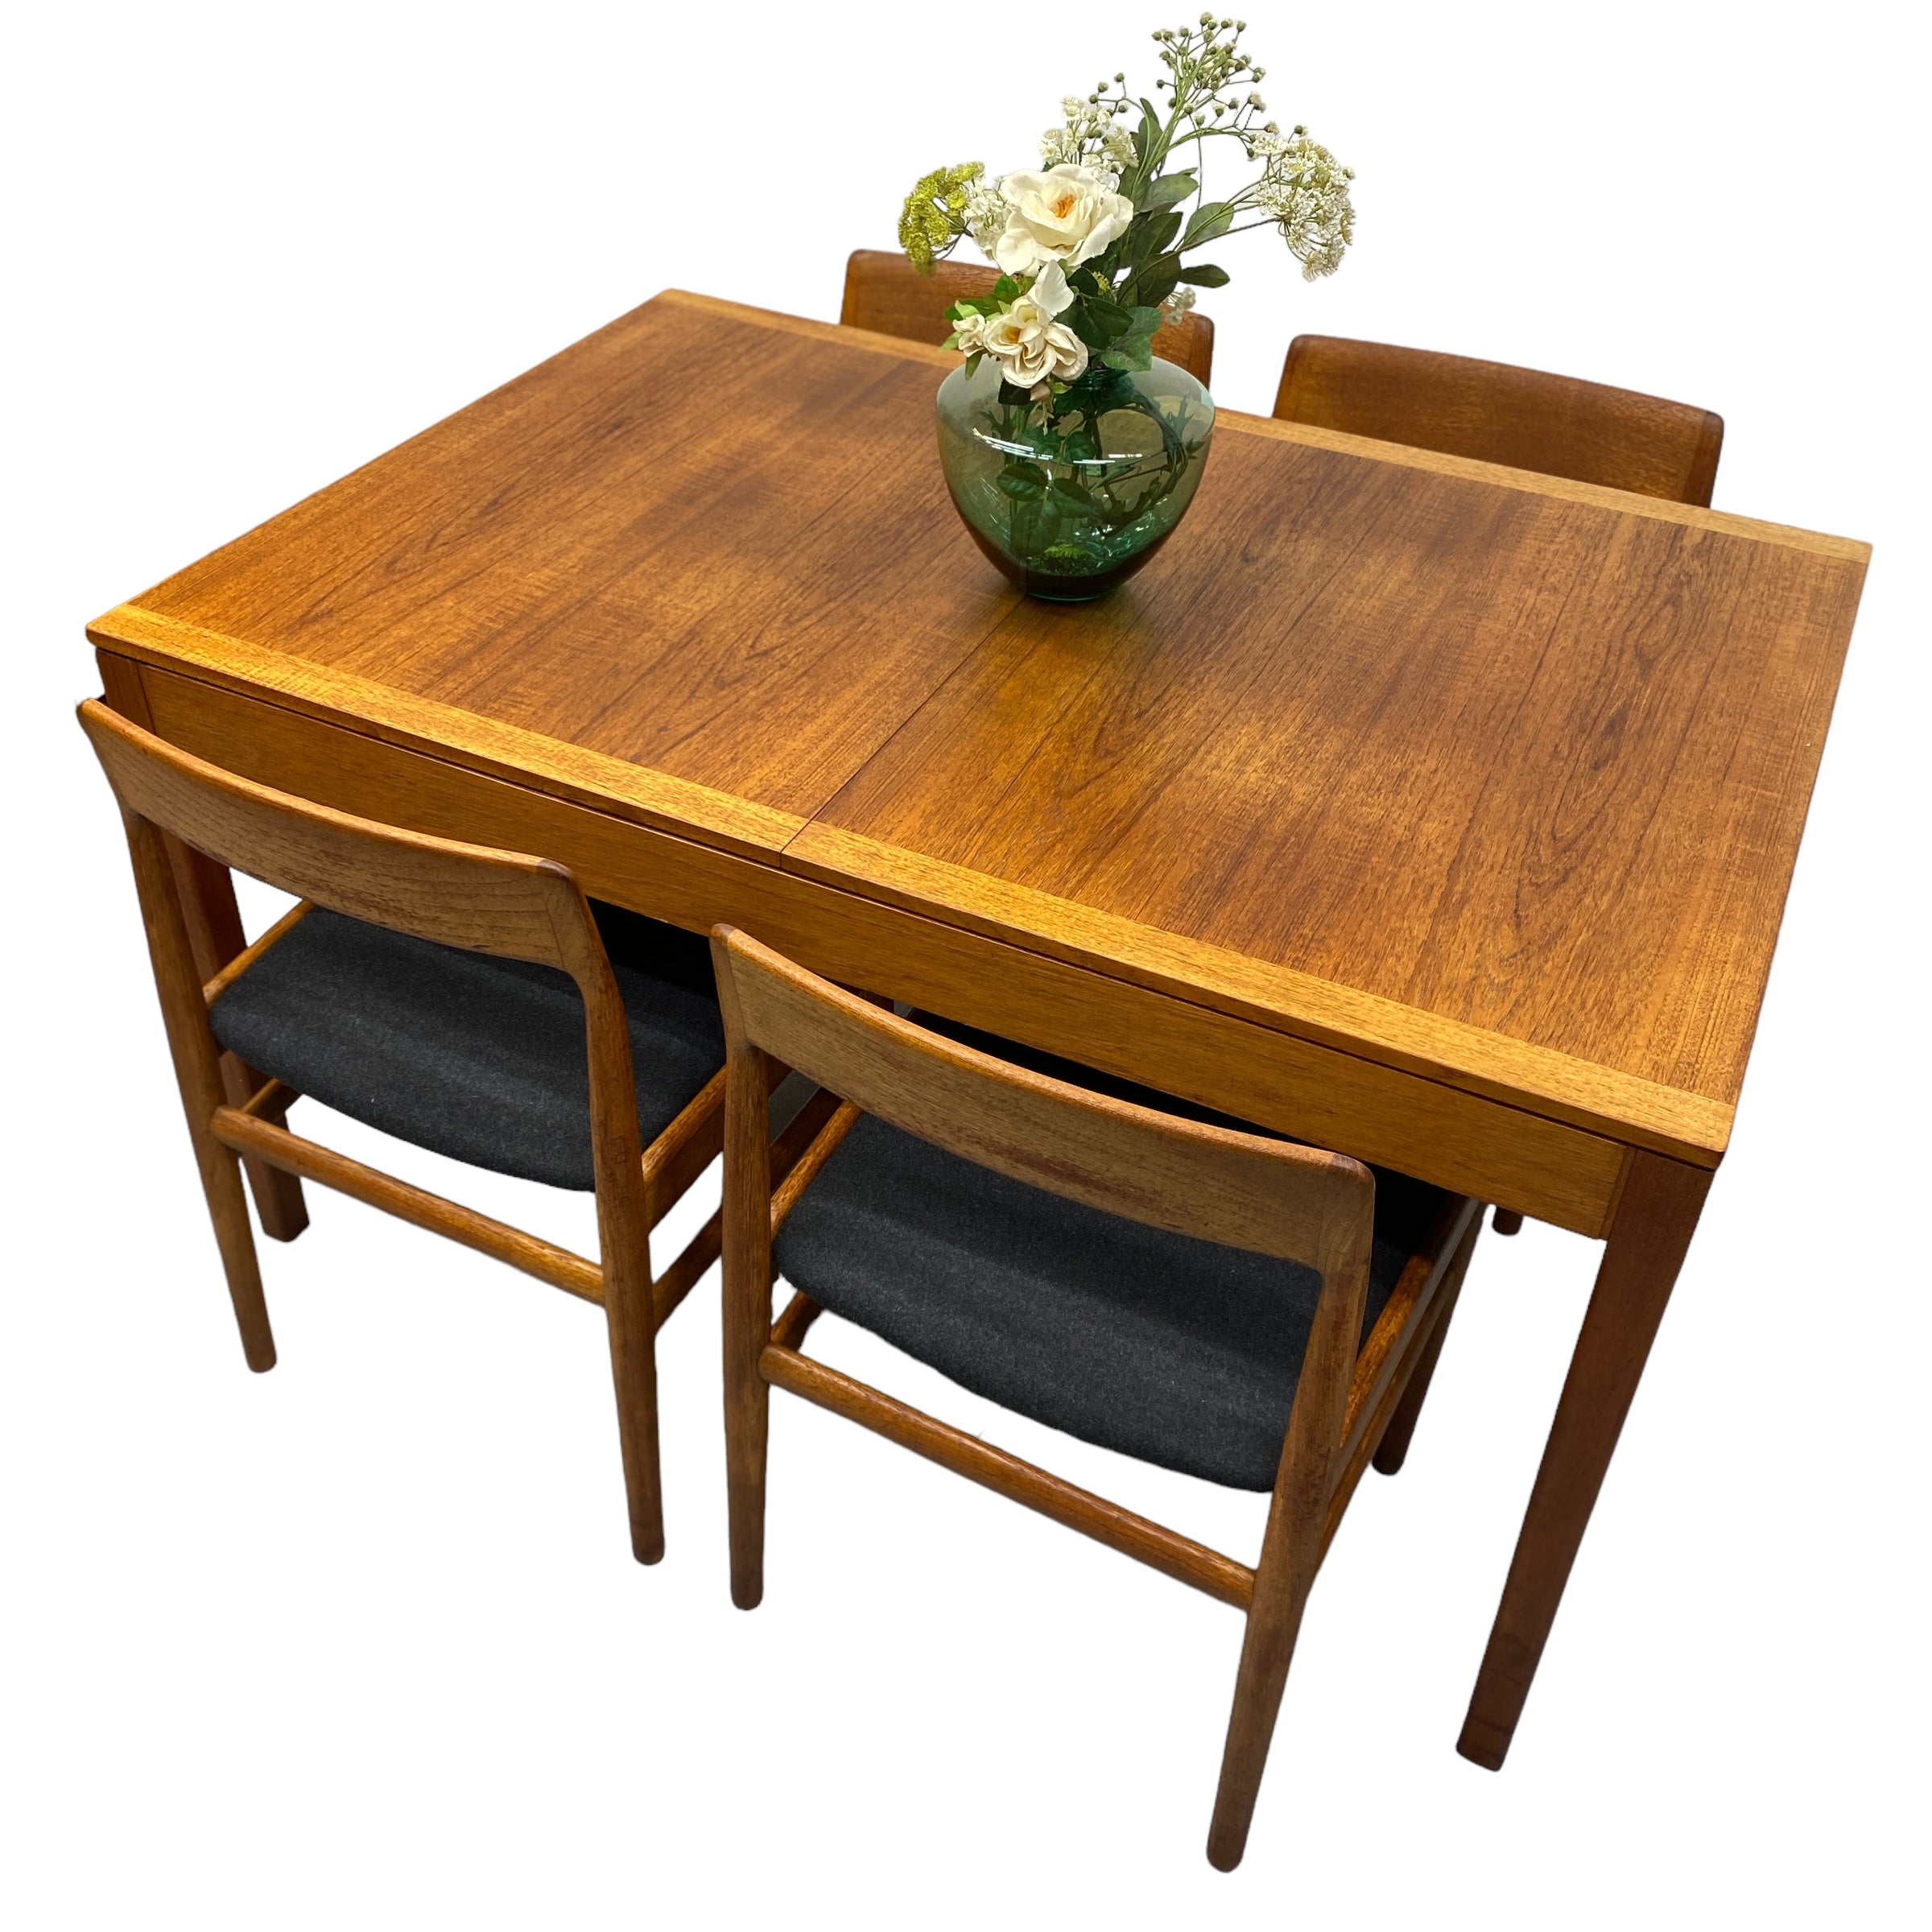 Top Of Danish Dining Table Henning Kjaernulf Extendable